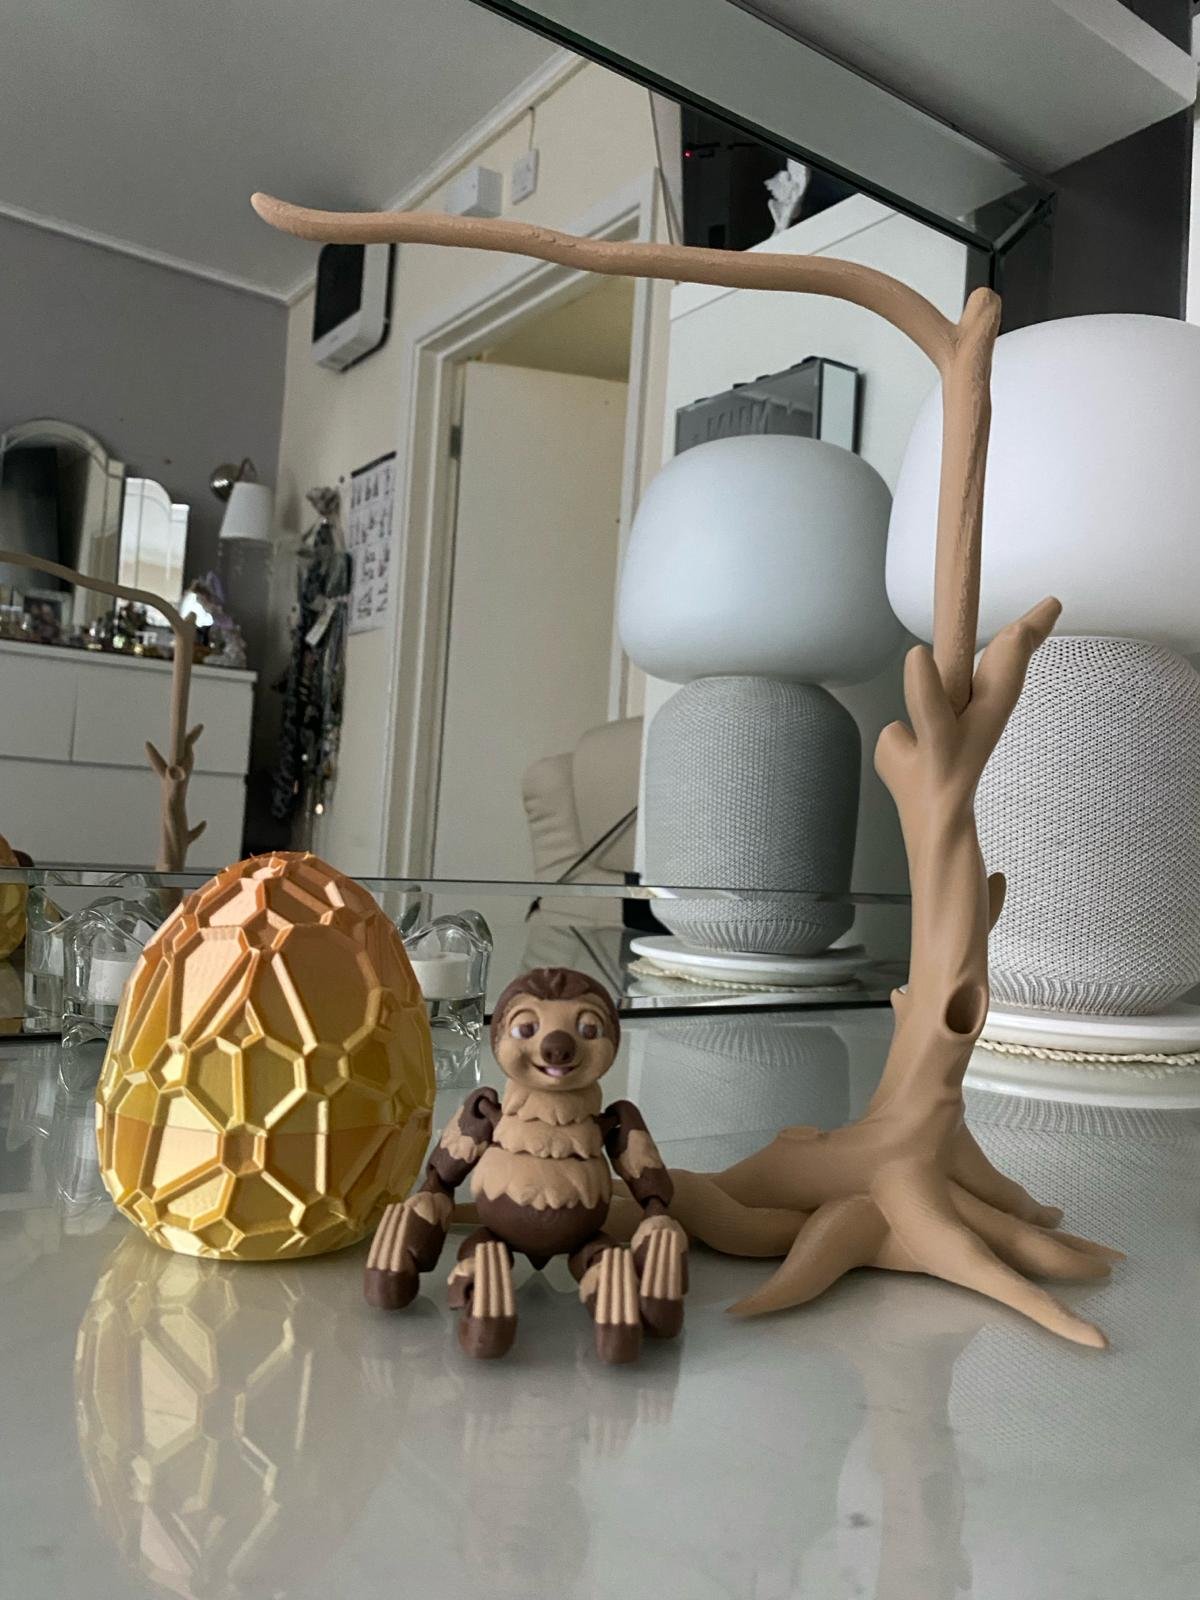 Combo 3D Printed Sloth and Egg (Baby)